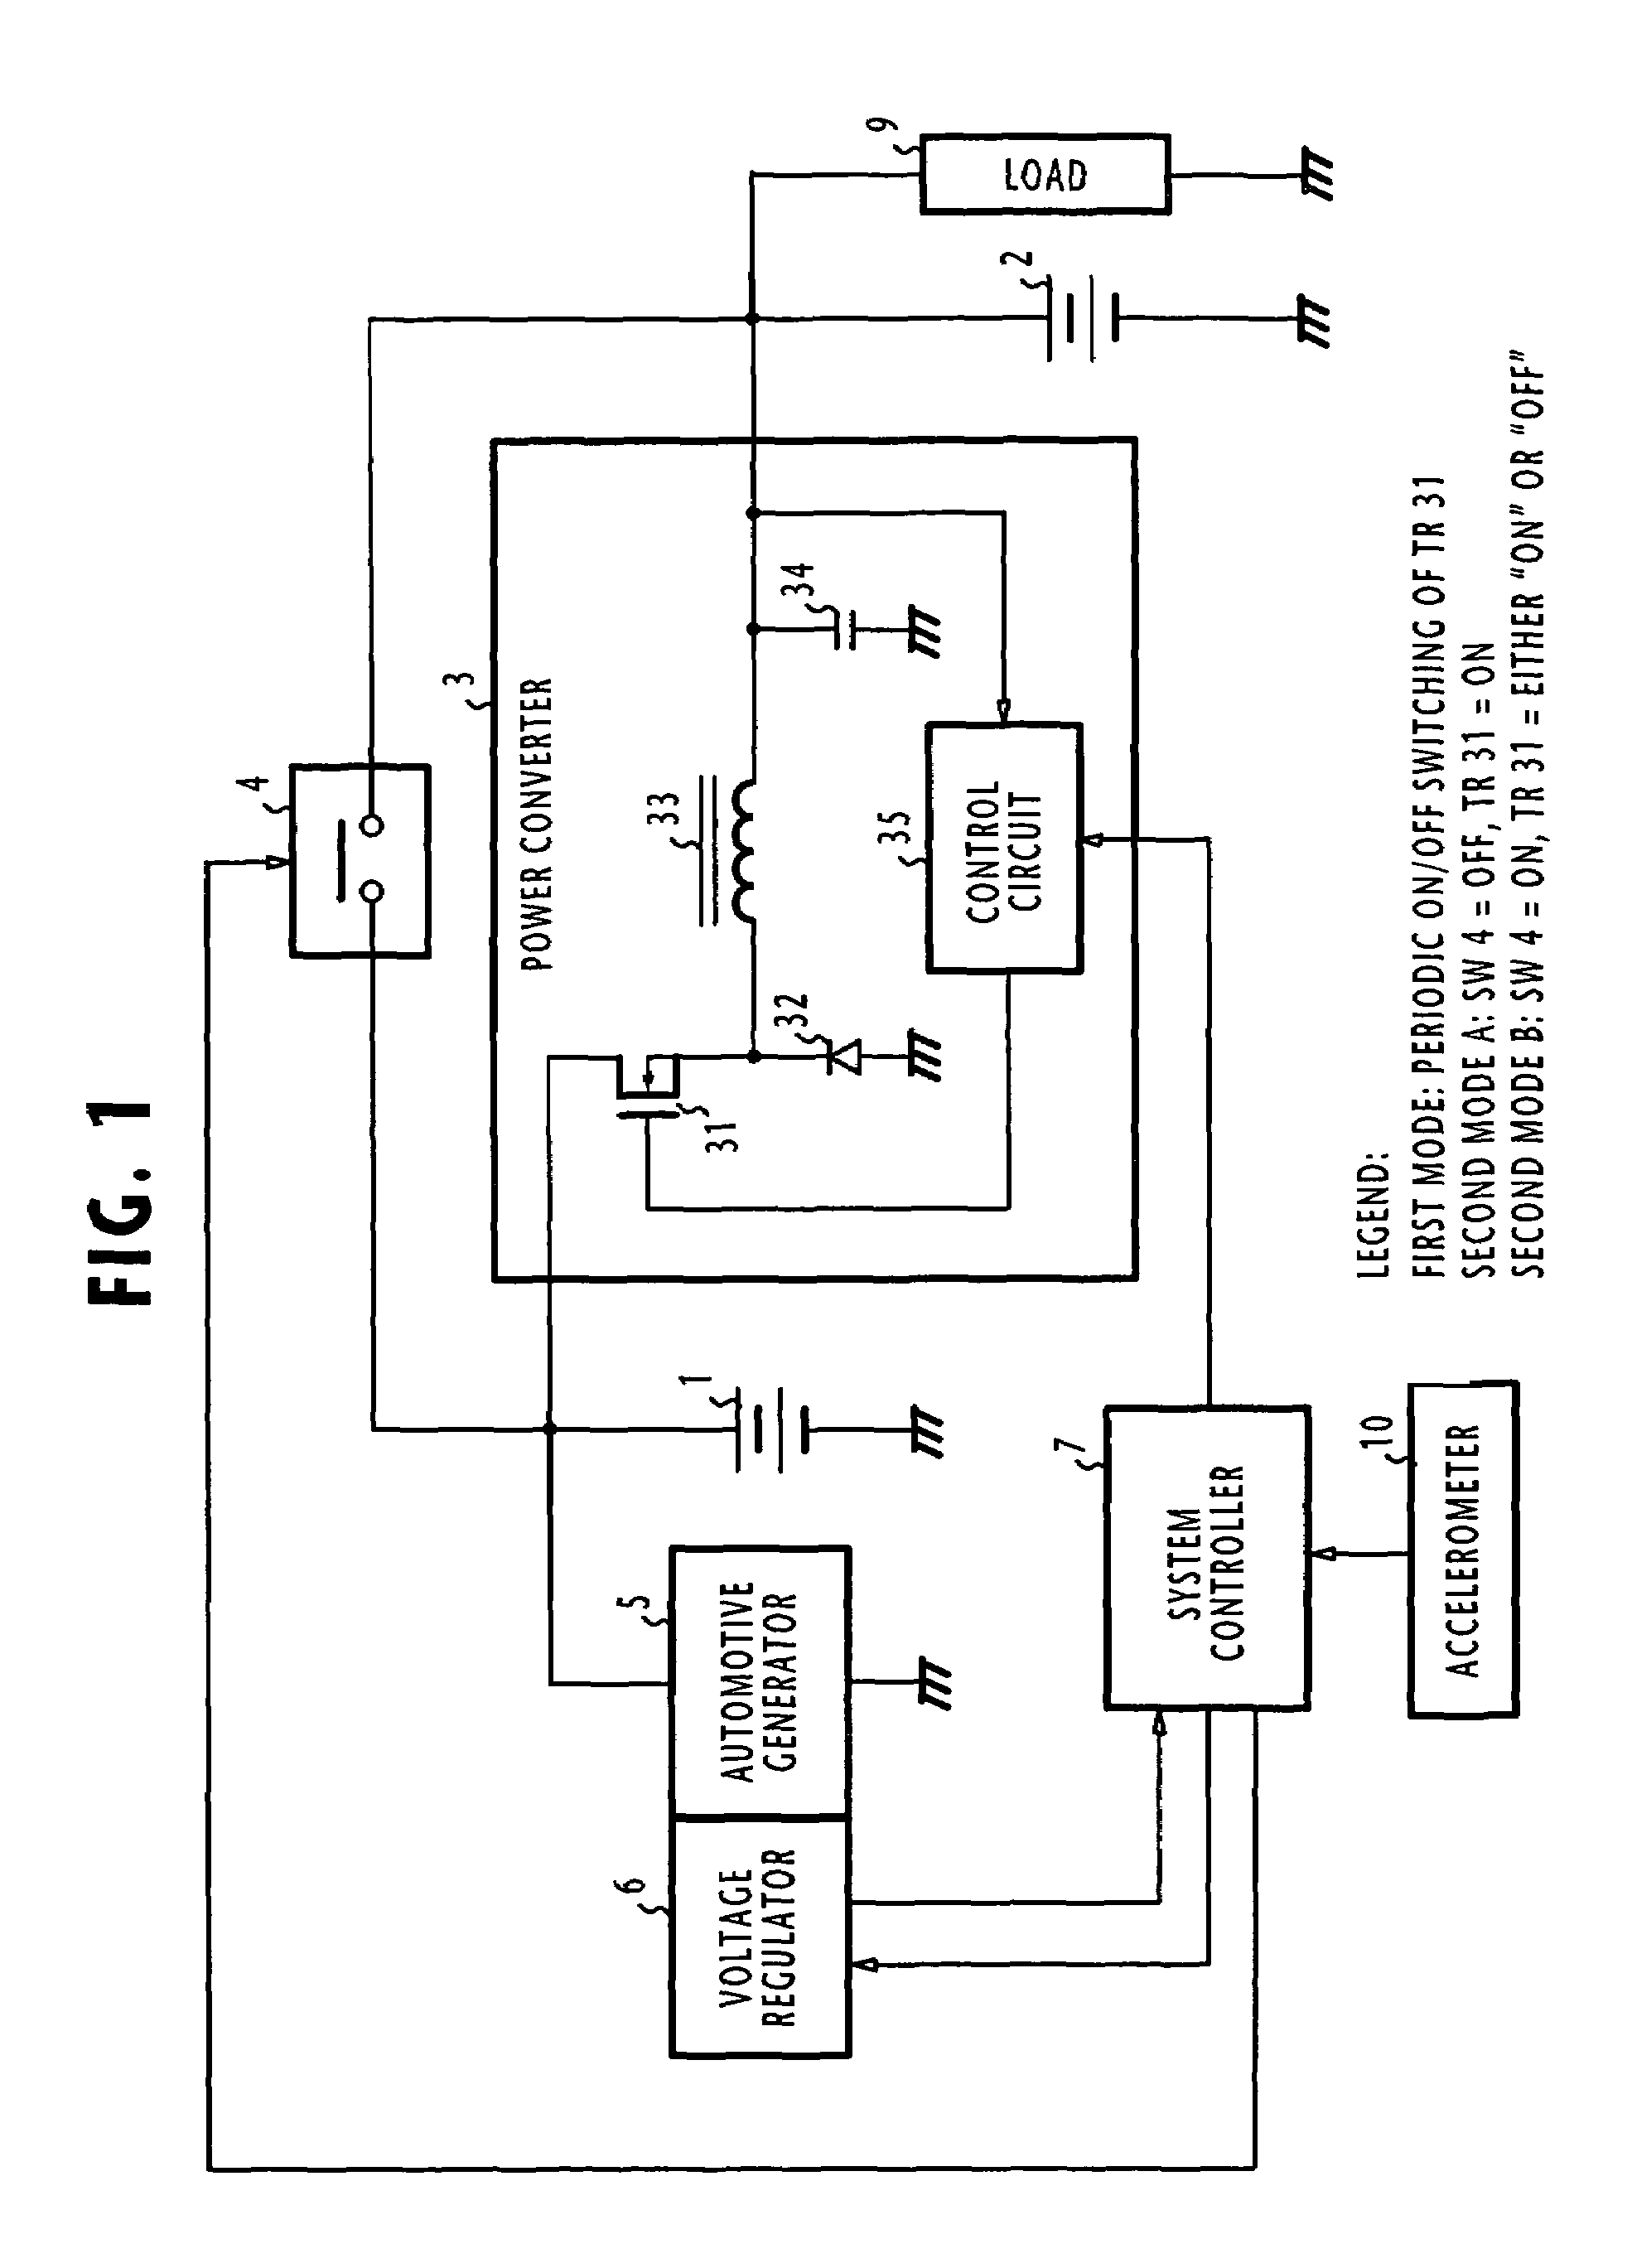 Vehicle-mounted power supply system